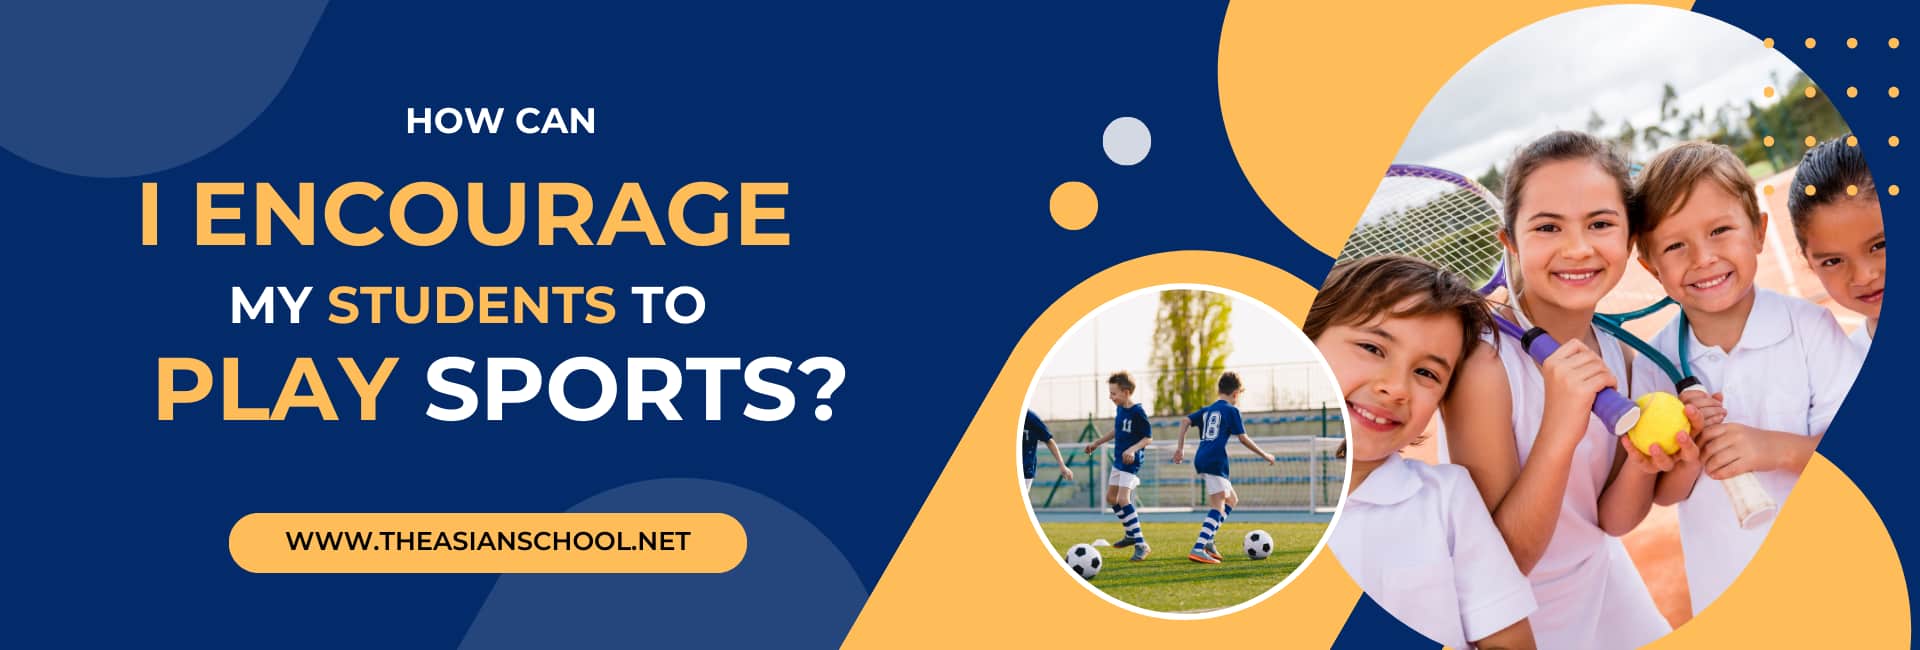 How Can I Encourage My Students To Play Sports